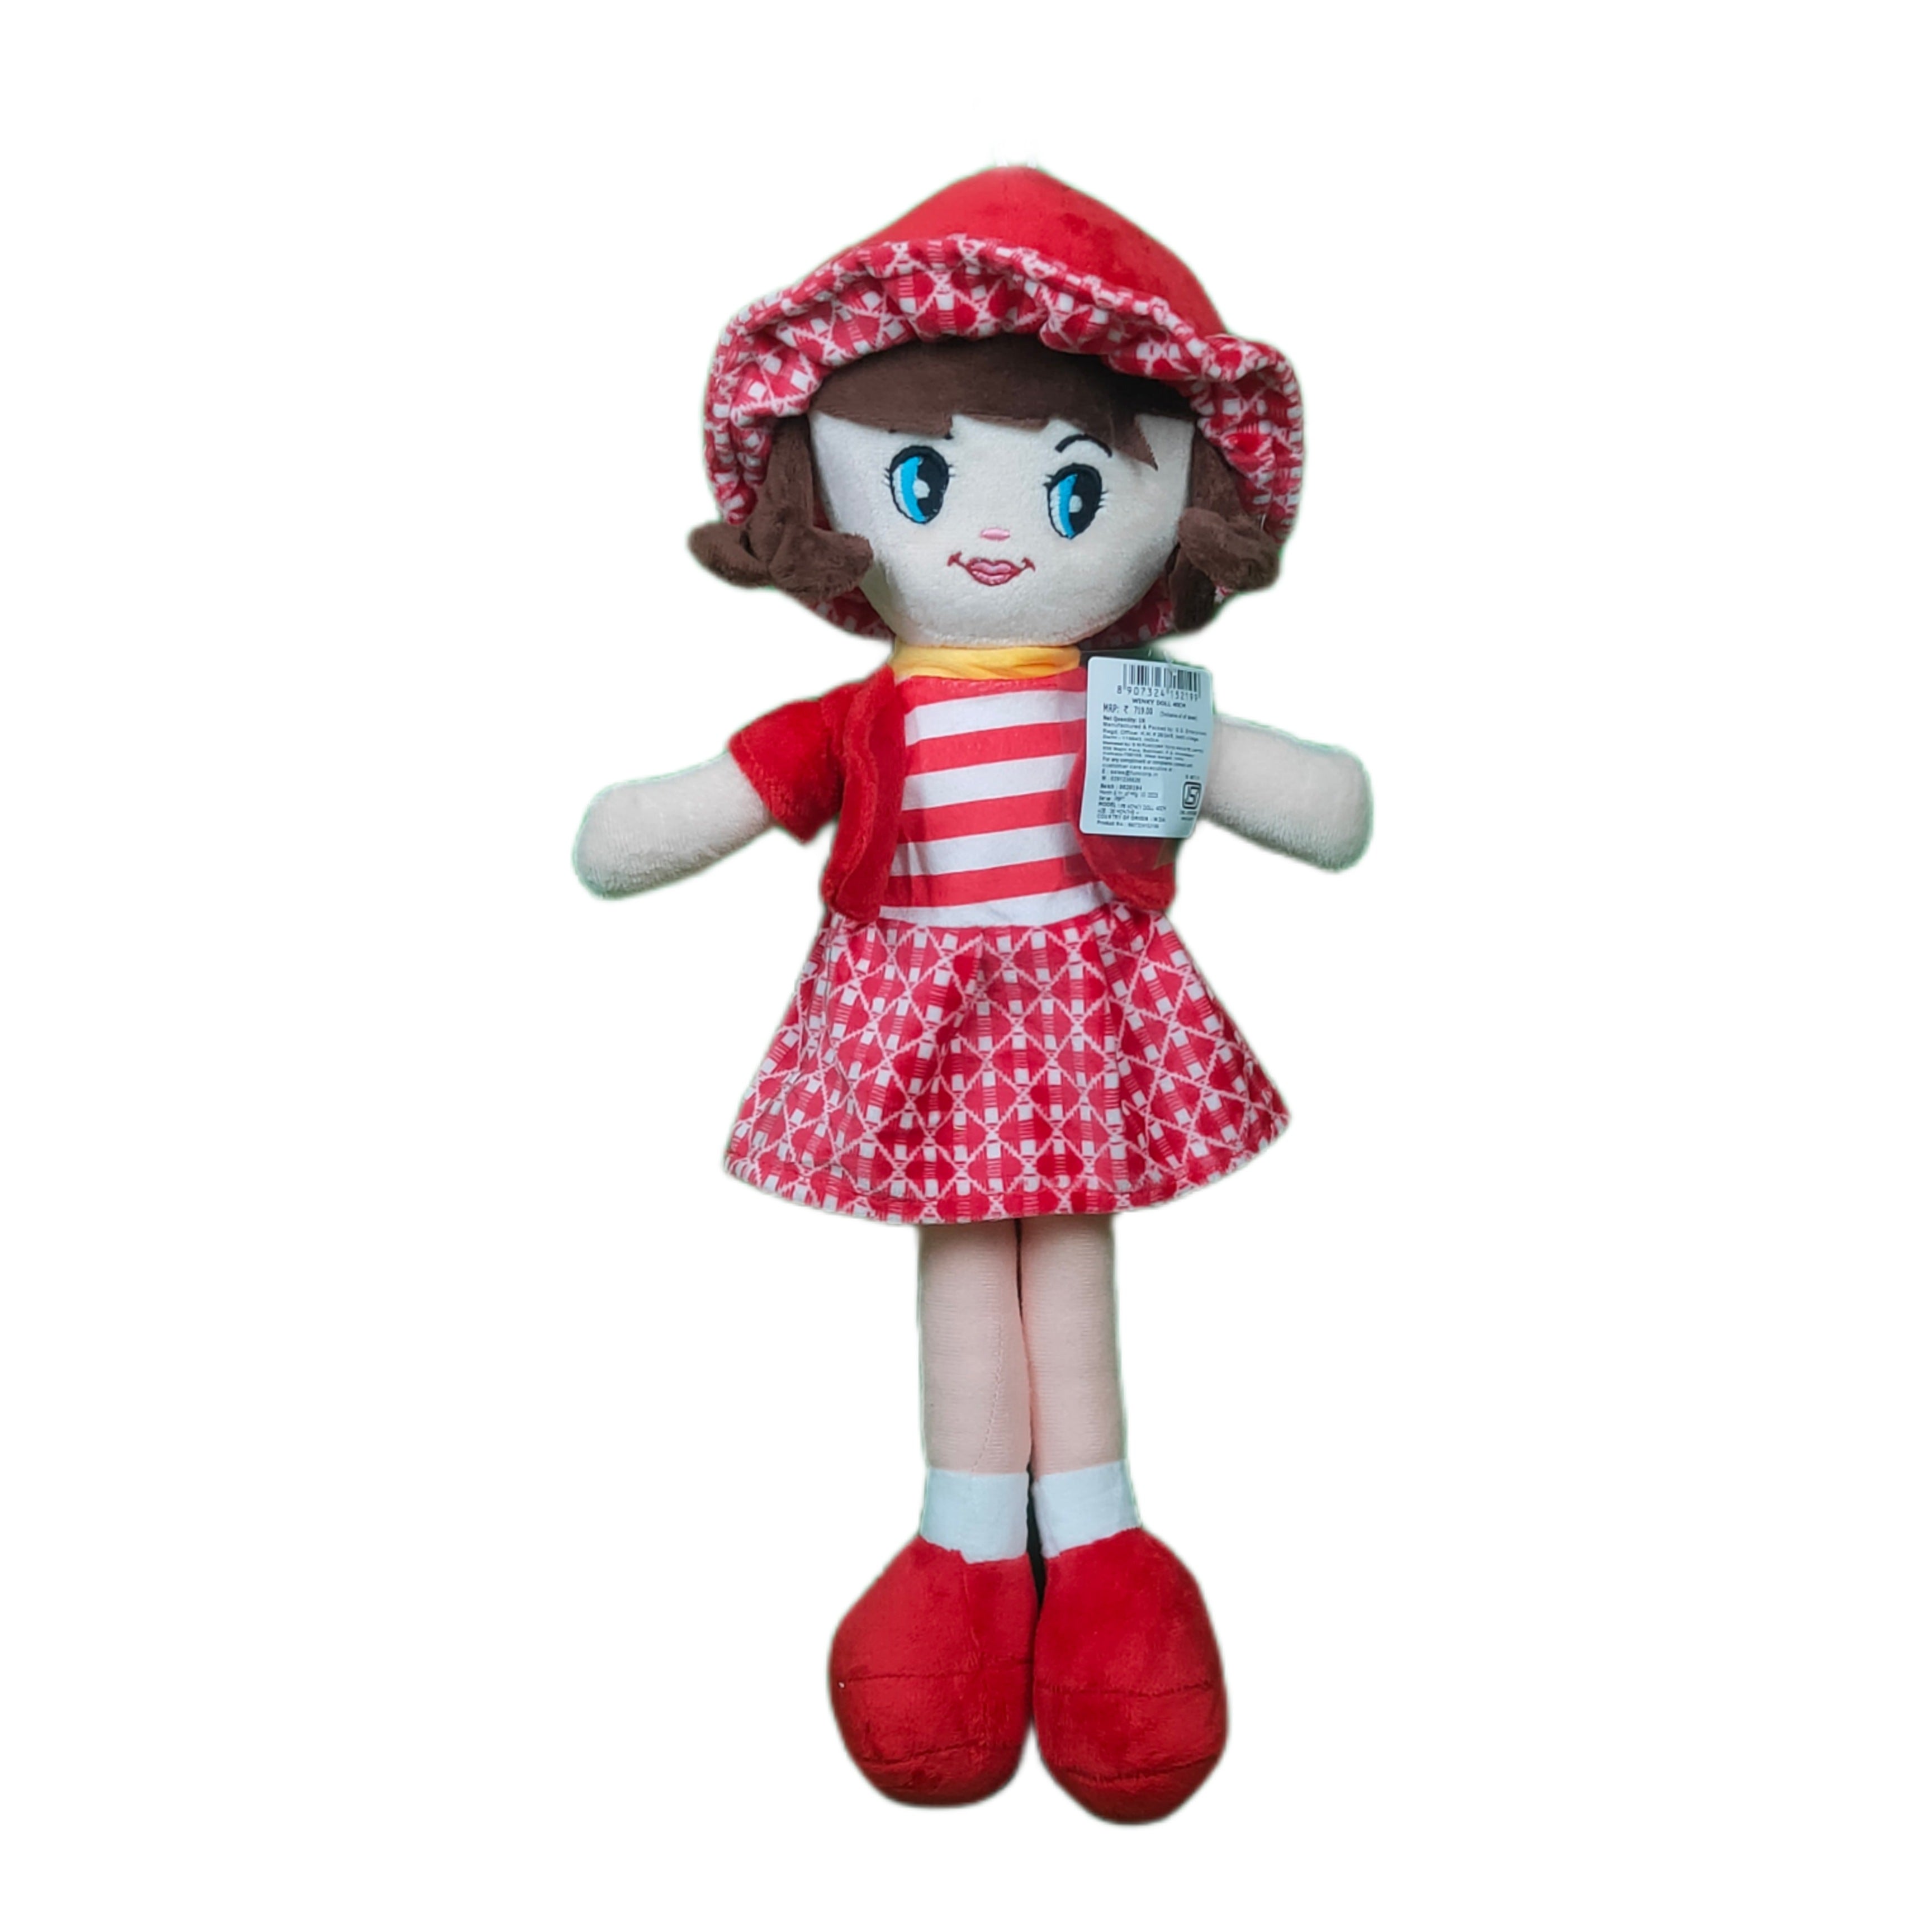 Play Hour Winky Rag Doll Plush Soft Toy Wearing Pink Dress for Ages 3 Years and Up, 40cm